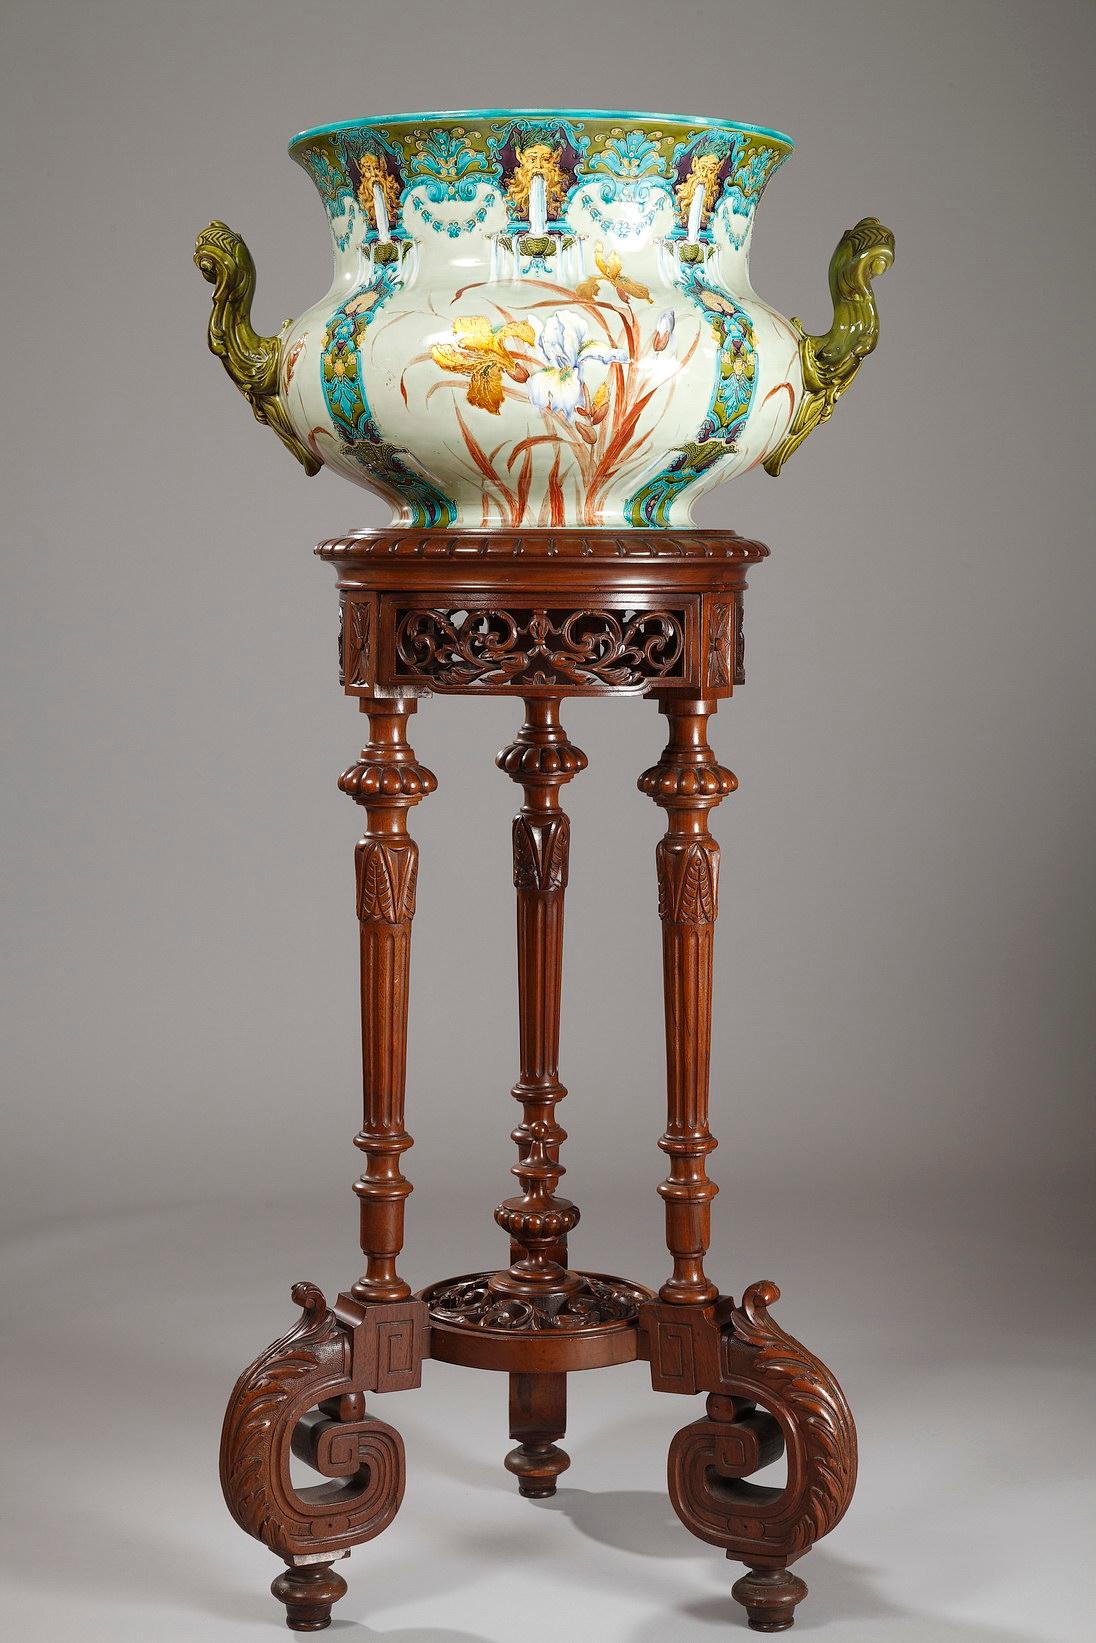 Signed on the reverse, with the making mark of the manufacture Gien

Measures: Jardinière– Height 36 cm (14 in.), large 66 x 47 cm (26 x 18 1/2 in.)
Stand– Height 101 cm (39 3/4 in.), diameter 60 cm (23 2/3 in.)
Total height 137 cm (54 in.)

1